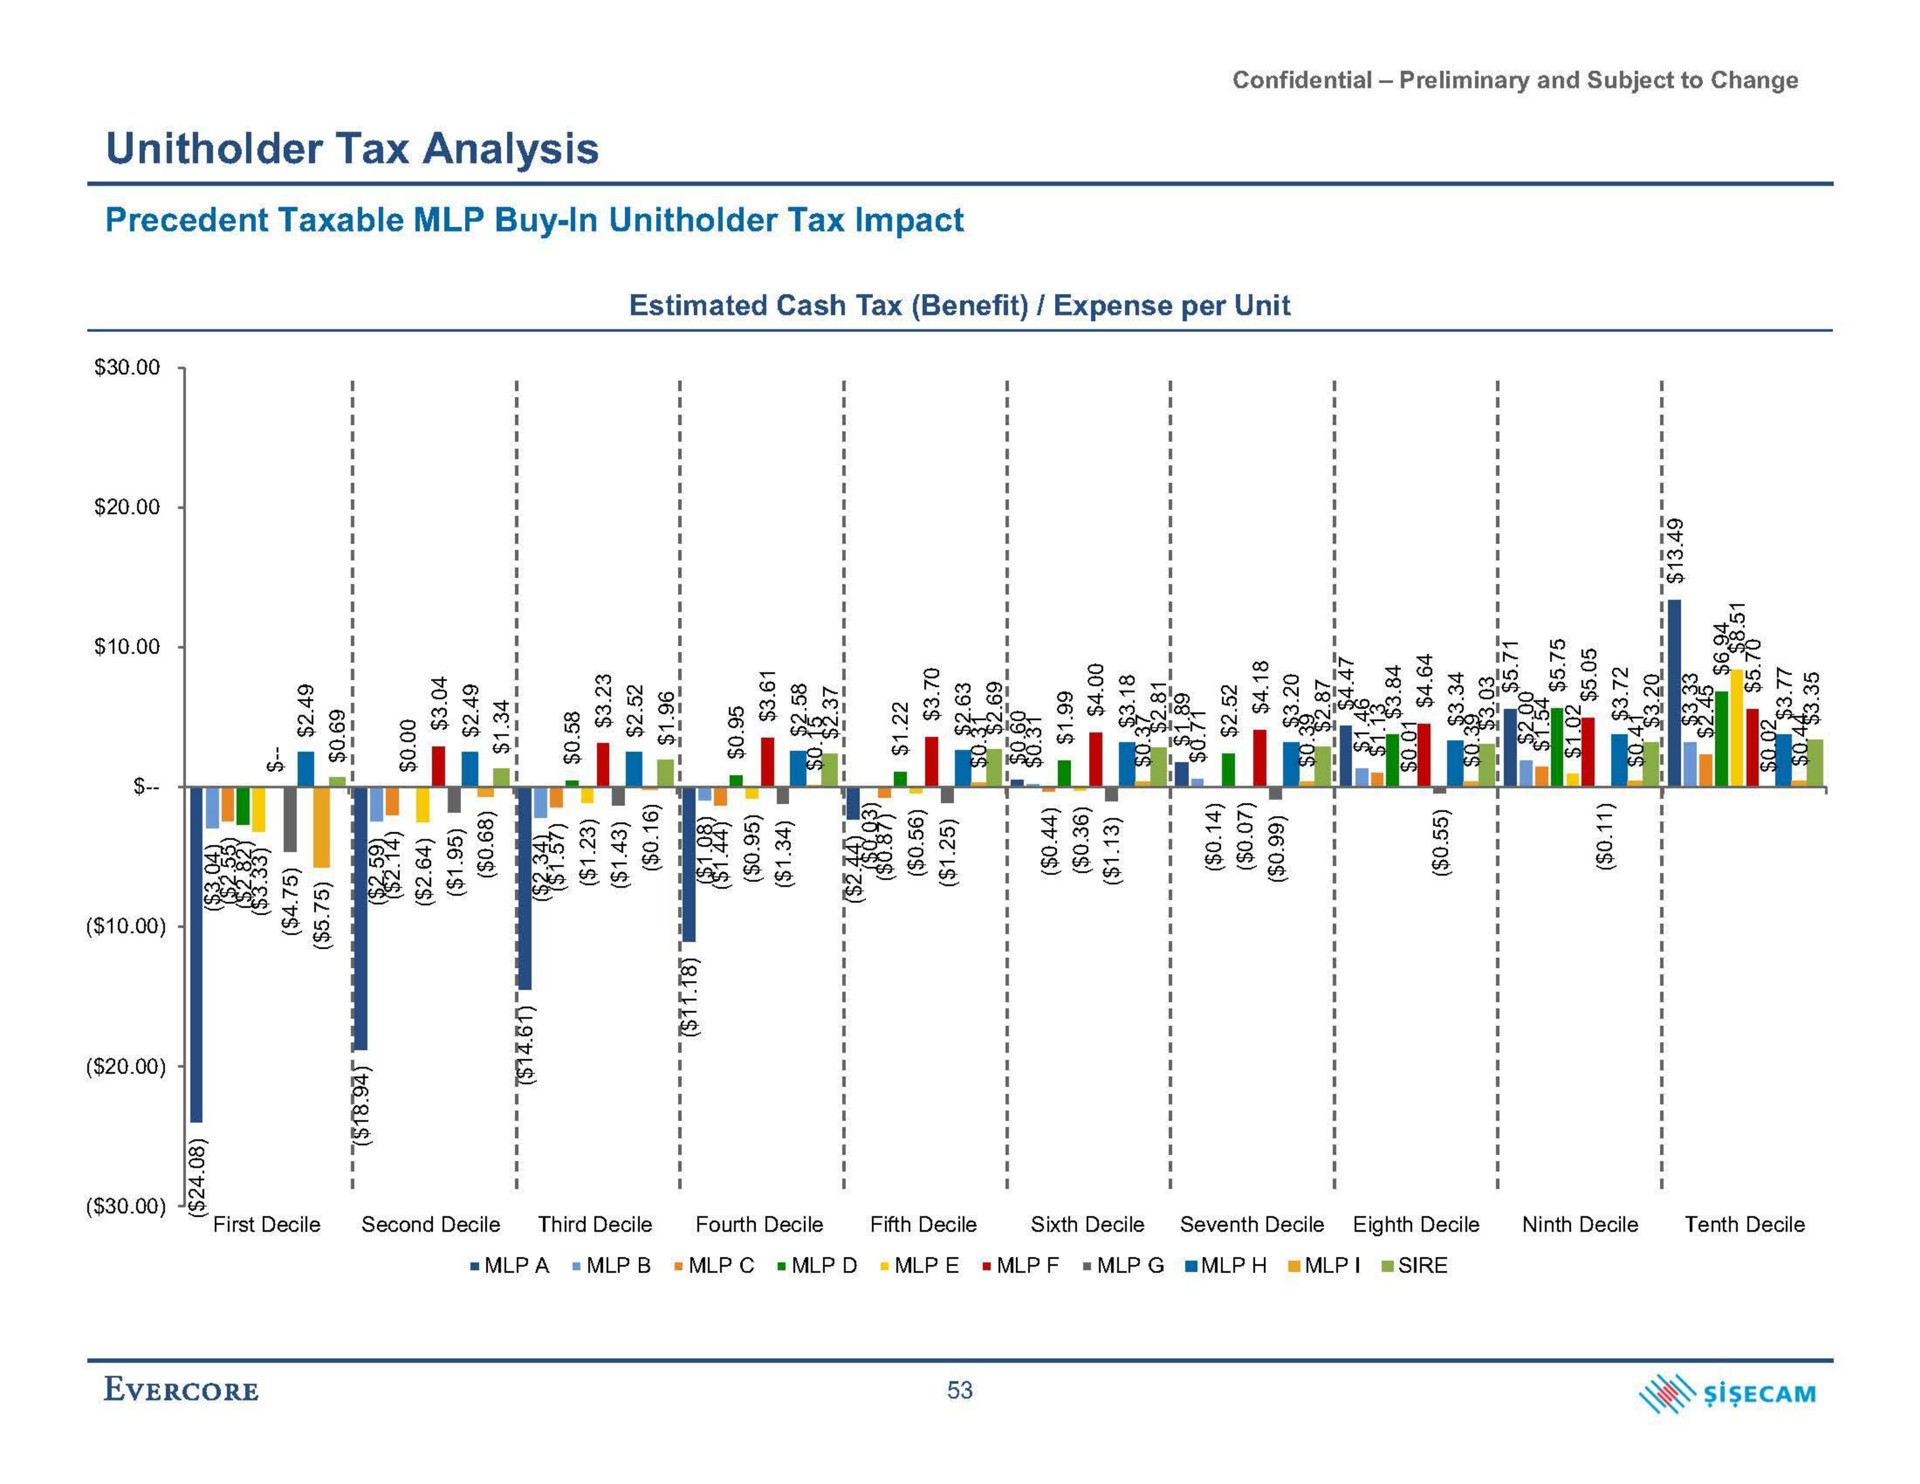 tax analysis precedent taxable buy in tax impact i a | Evercore